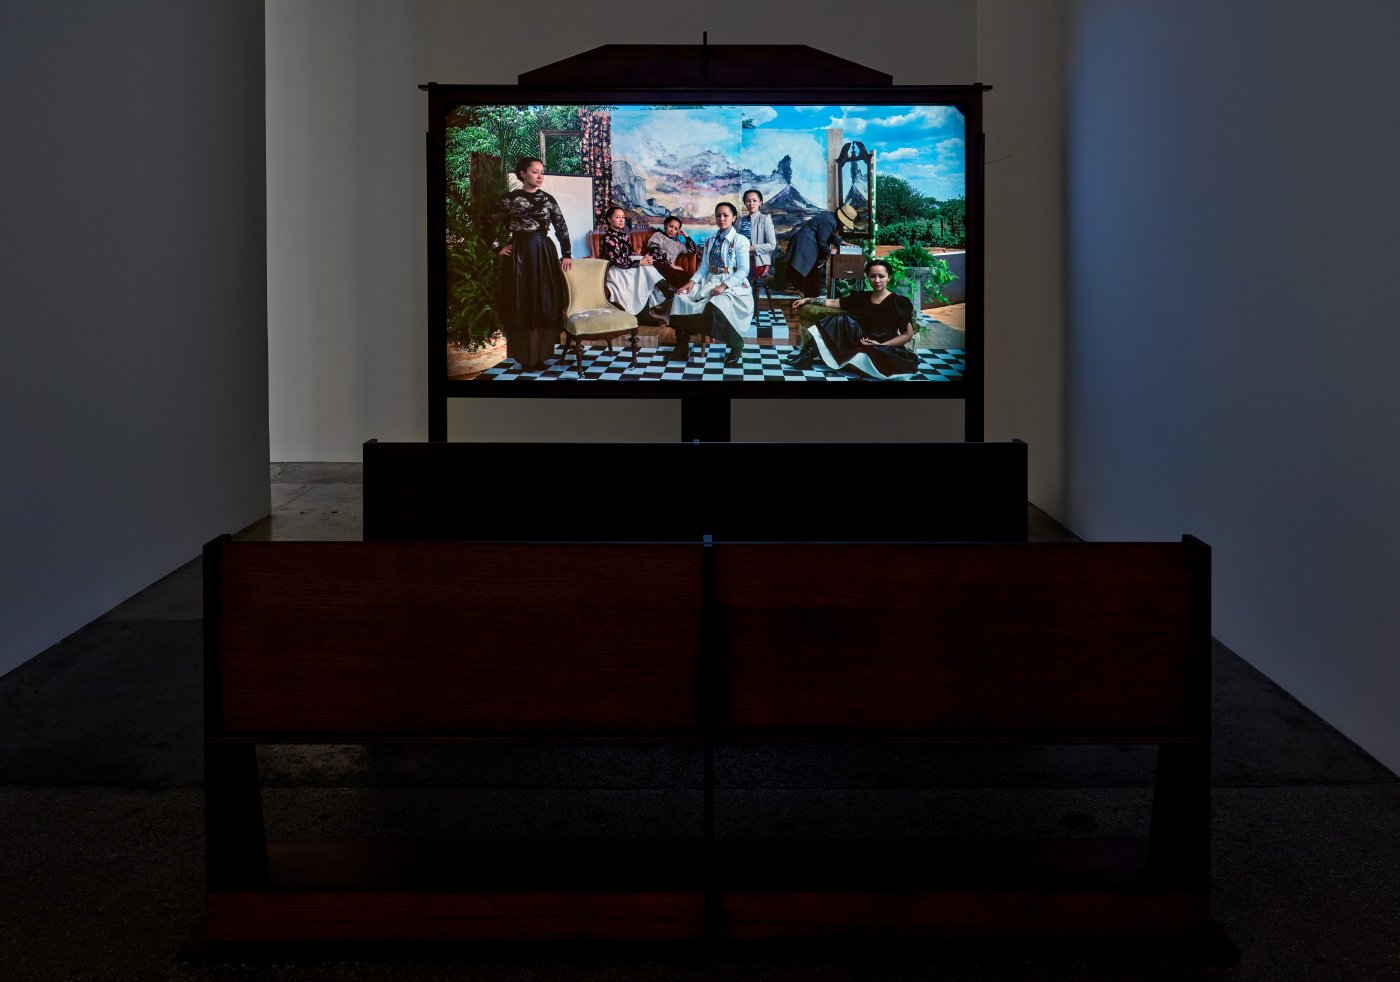 Installation image for Pamela Phatsimo Sunstrum: I have withheld much more than I have written, at Galerie Lelong & Co.